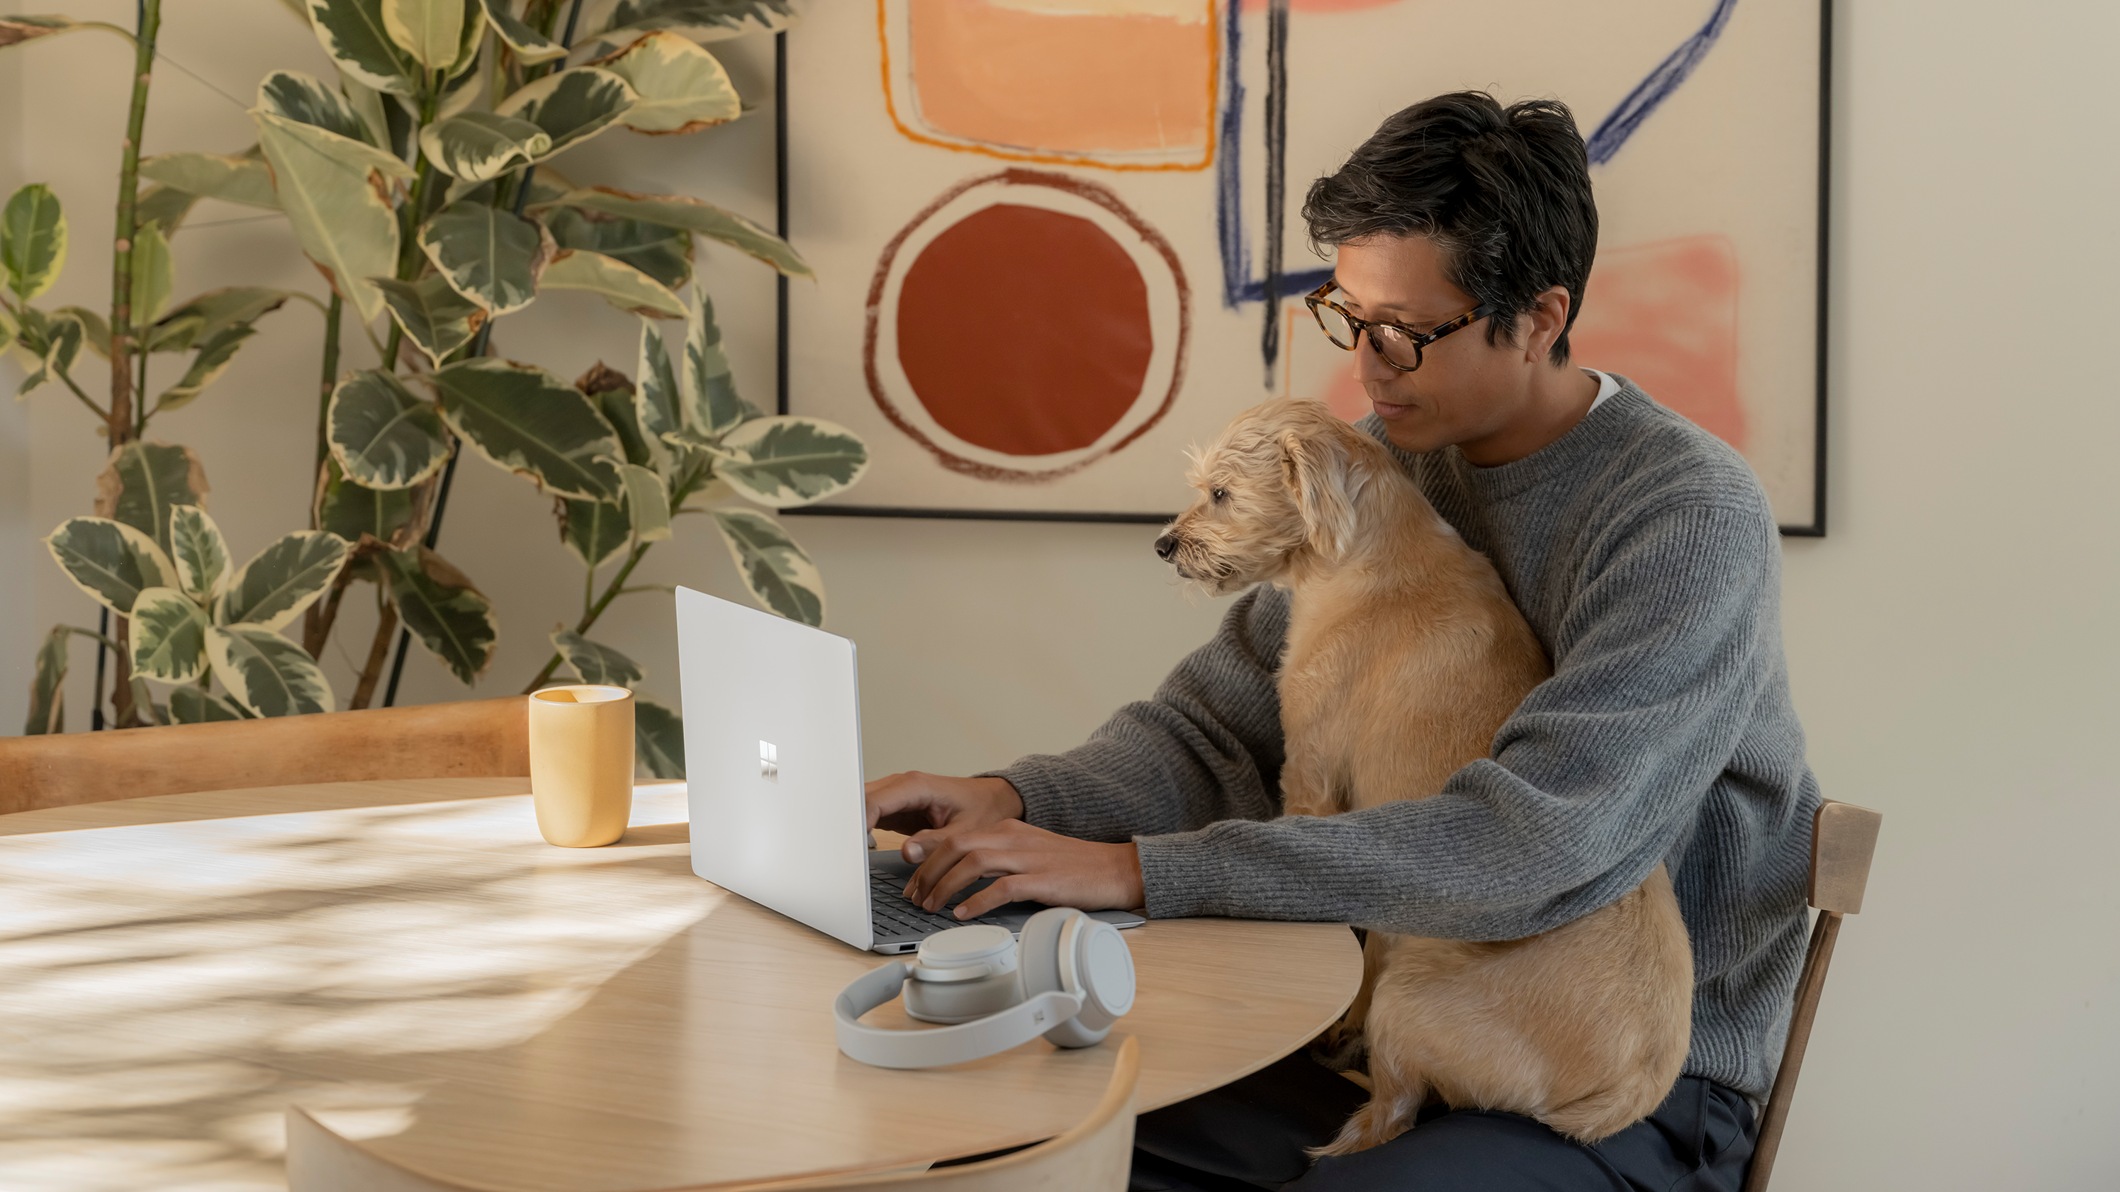 A man types on his laptop while working at home with his dog.